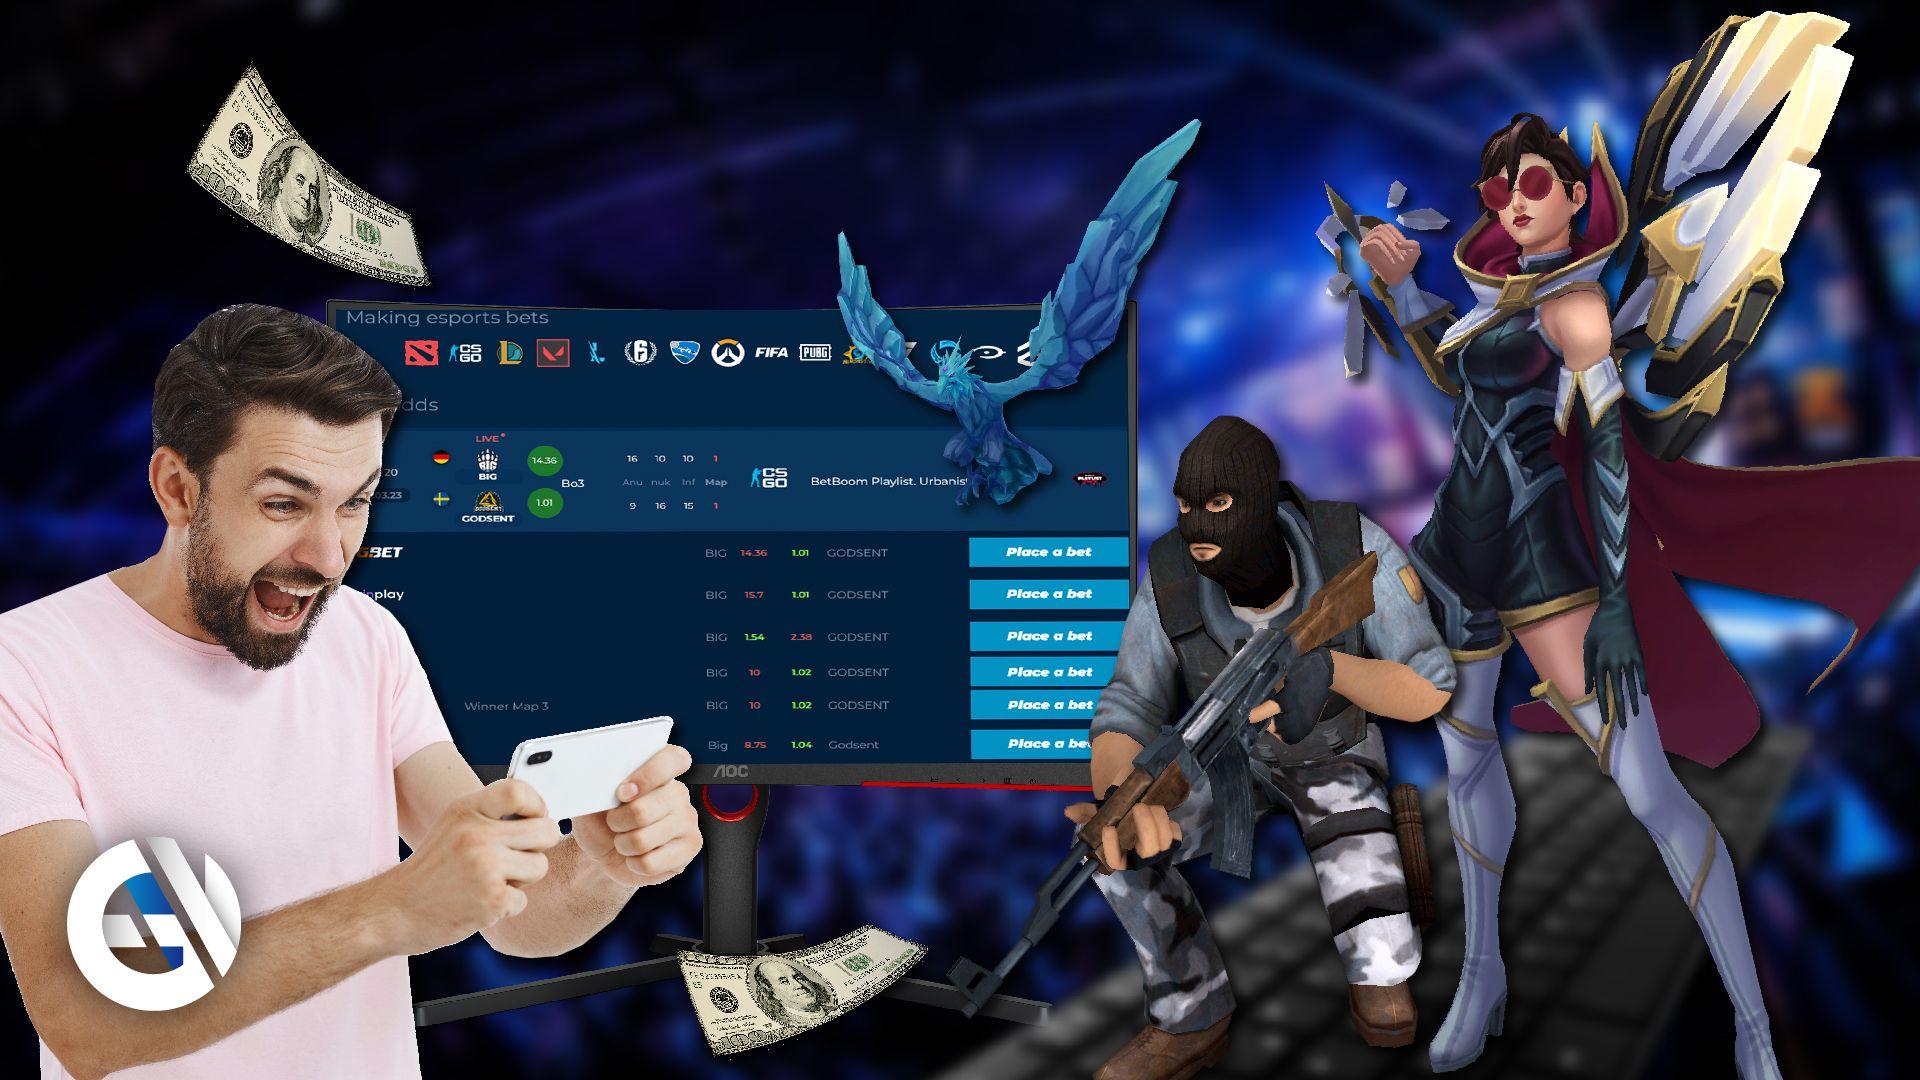 Everything about eSports is getting bigger and bigger: how marketing, viewership, and betting are growing alongside the growth of competitive video gaming